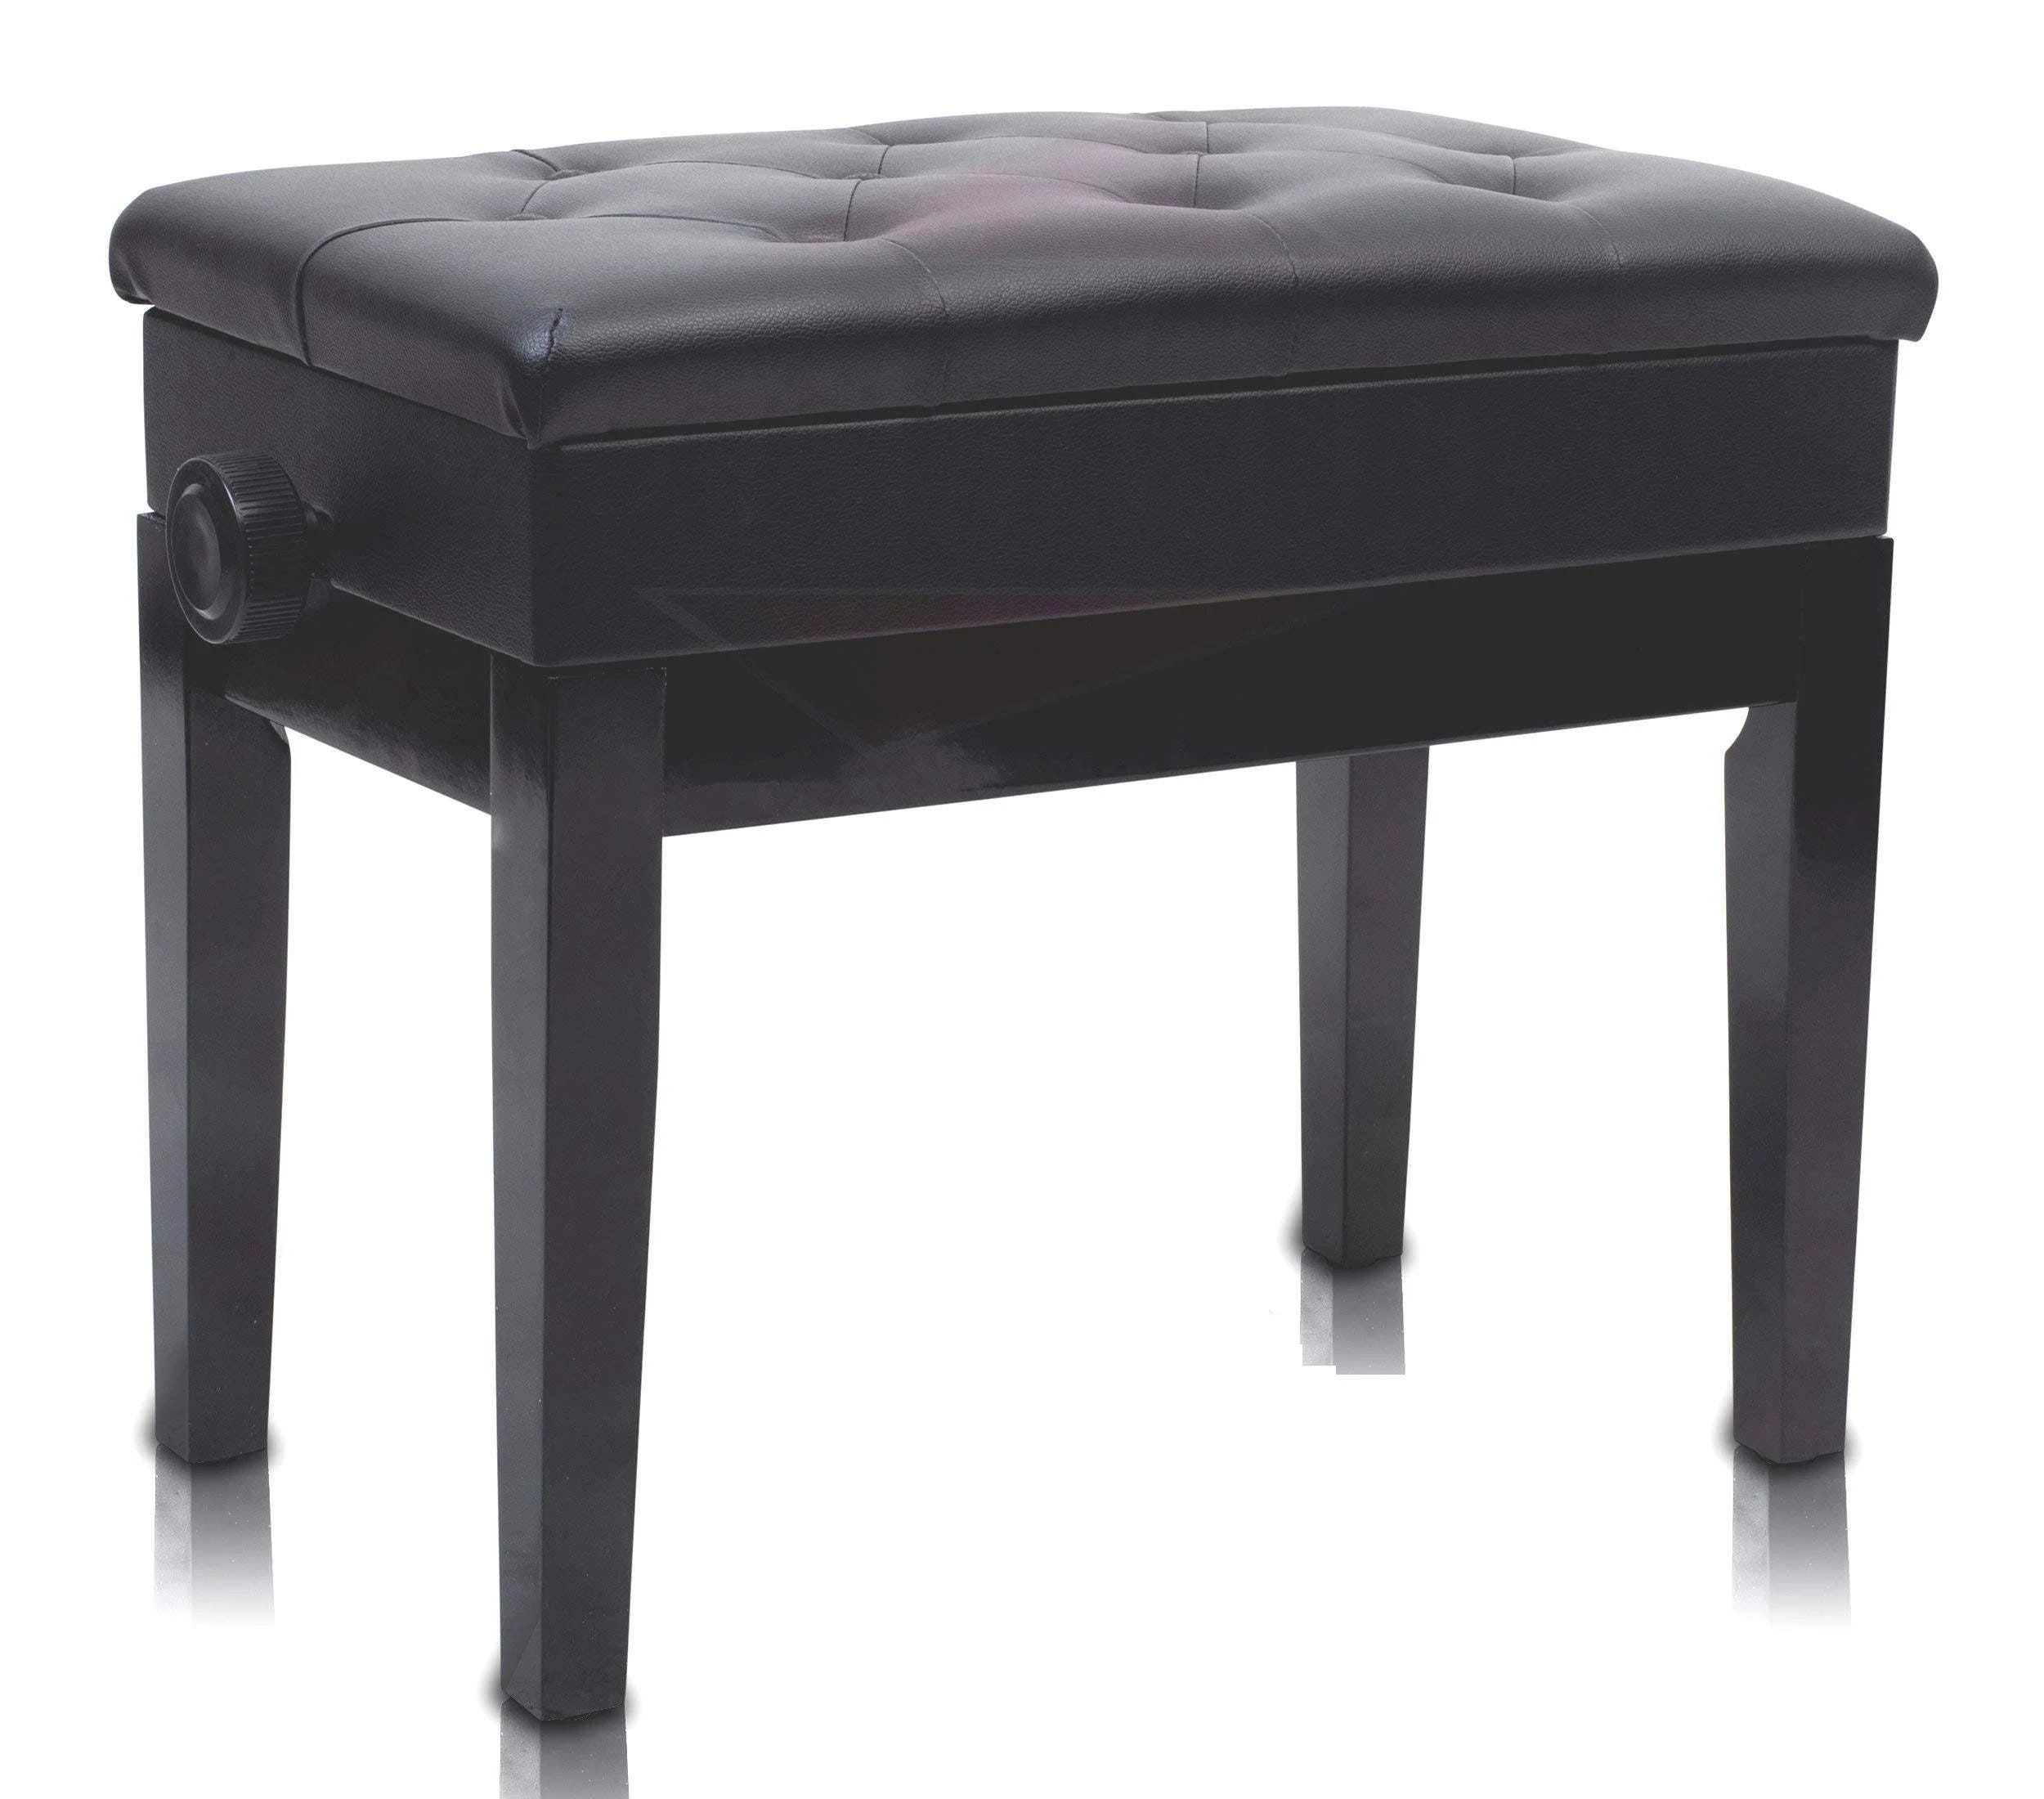 Premium Adjustable Piano Bench (Griffin AP Series) - Sleek Black Gloss Finish & Luxurious Padded Seat for Keyboard/Piano Use | Image